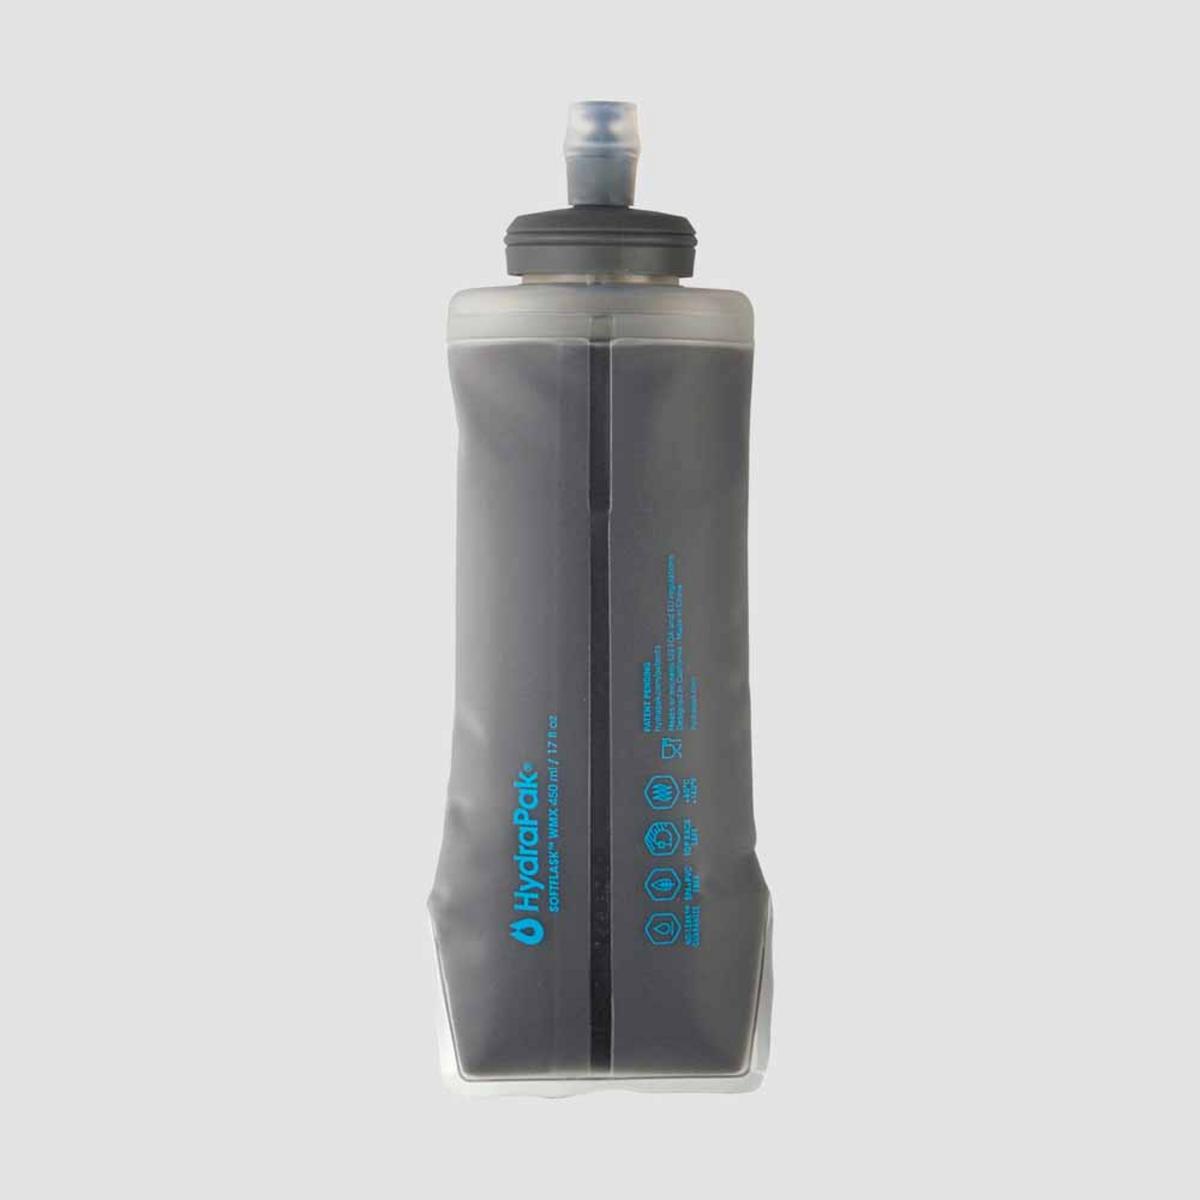 Ultimate Direction Body Bottle 460 Insulated